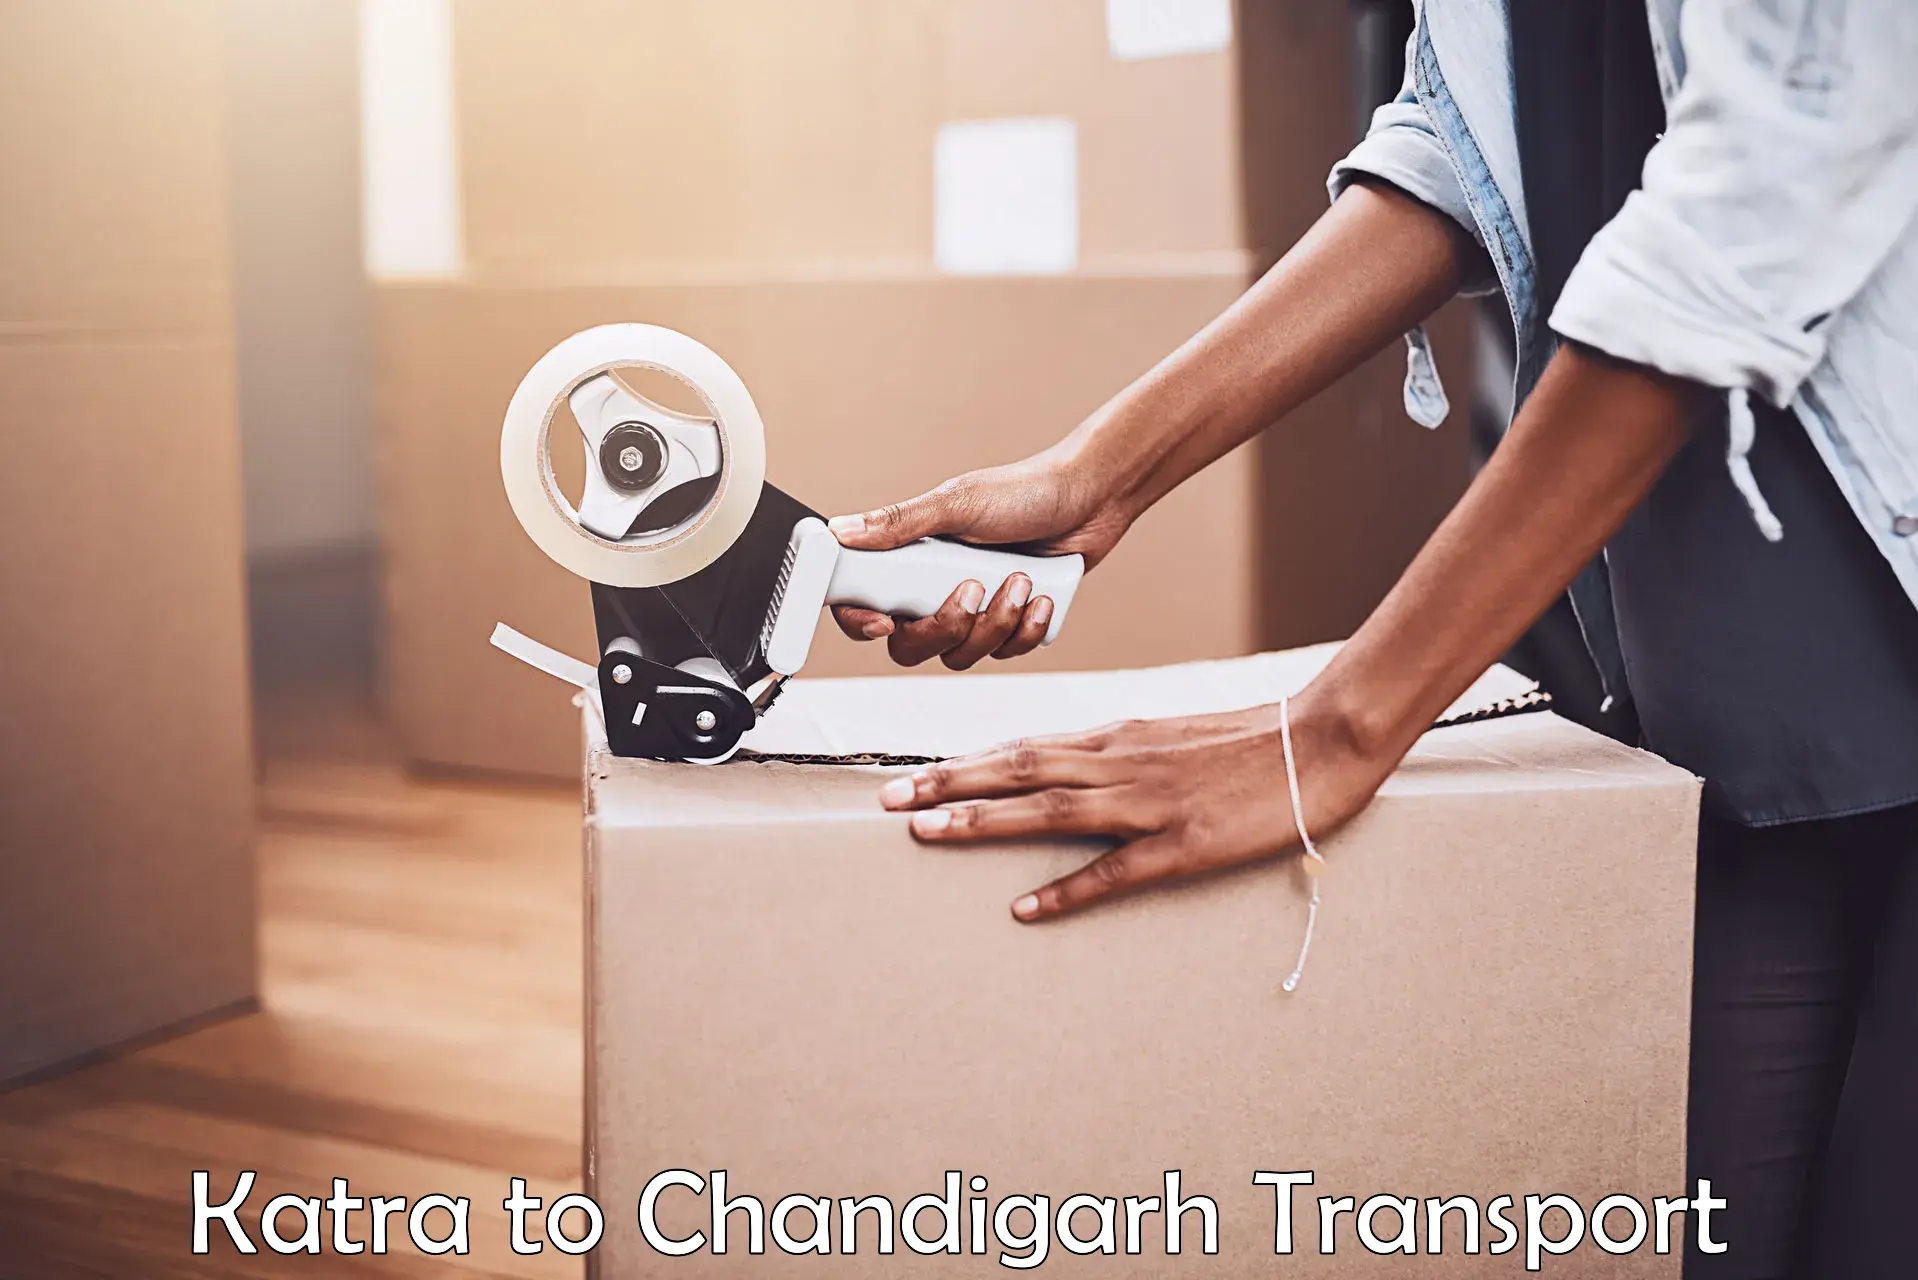 Container transport service Katra to Chandigarh